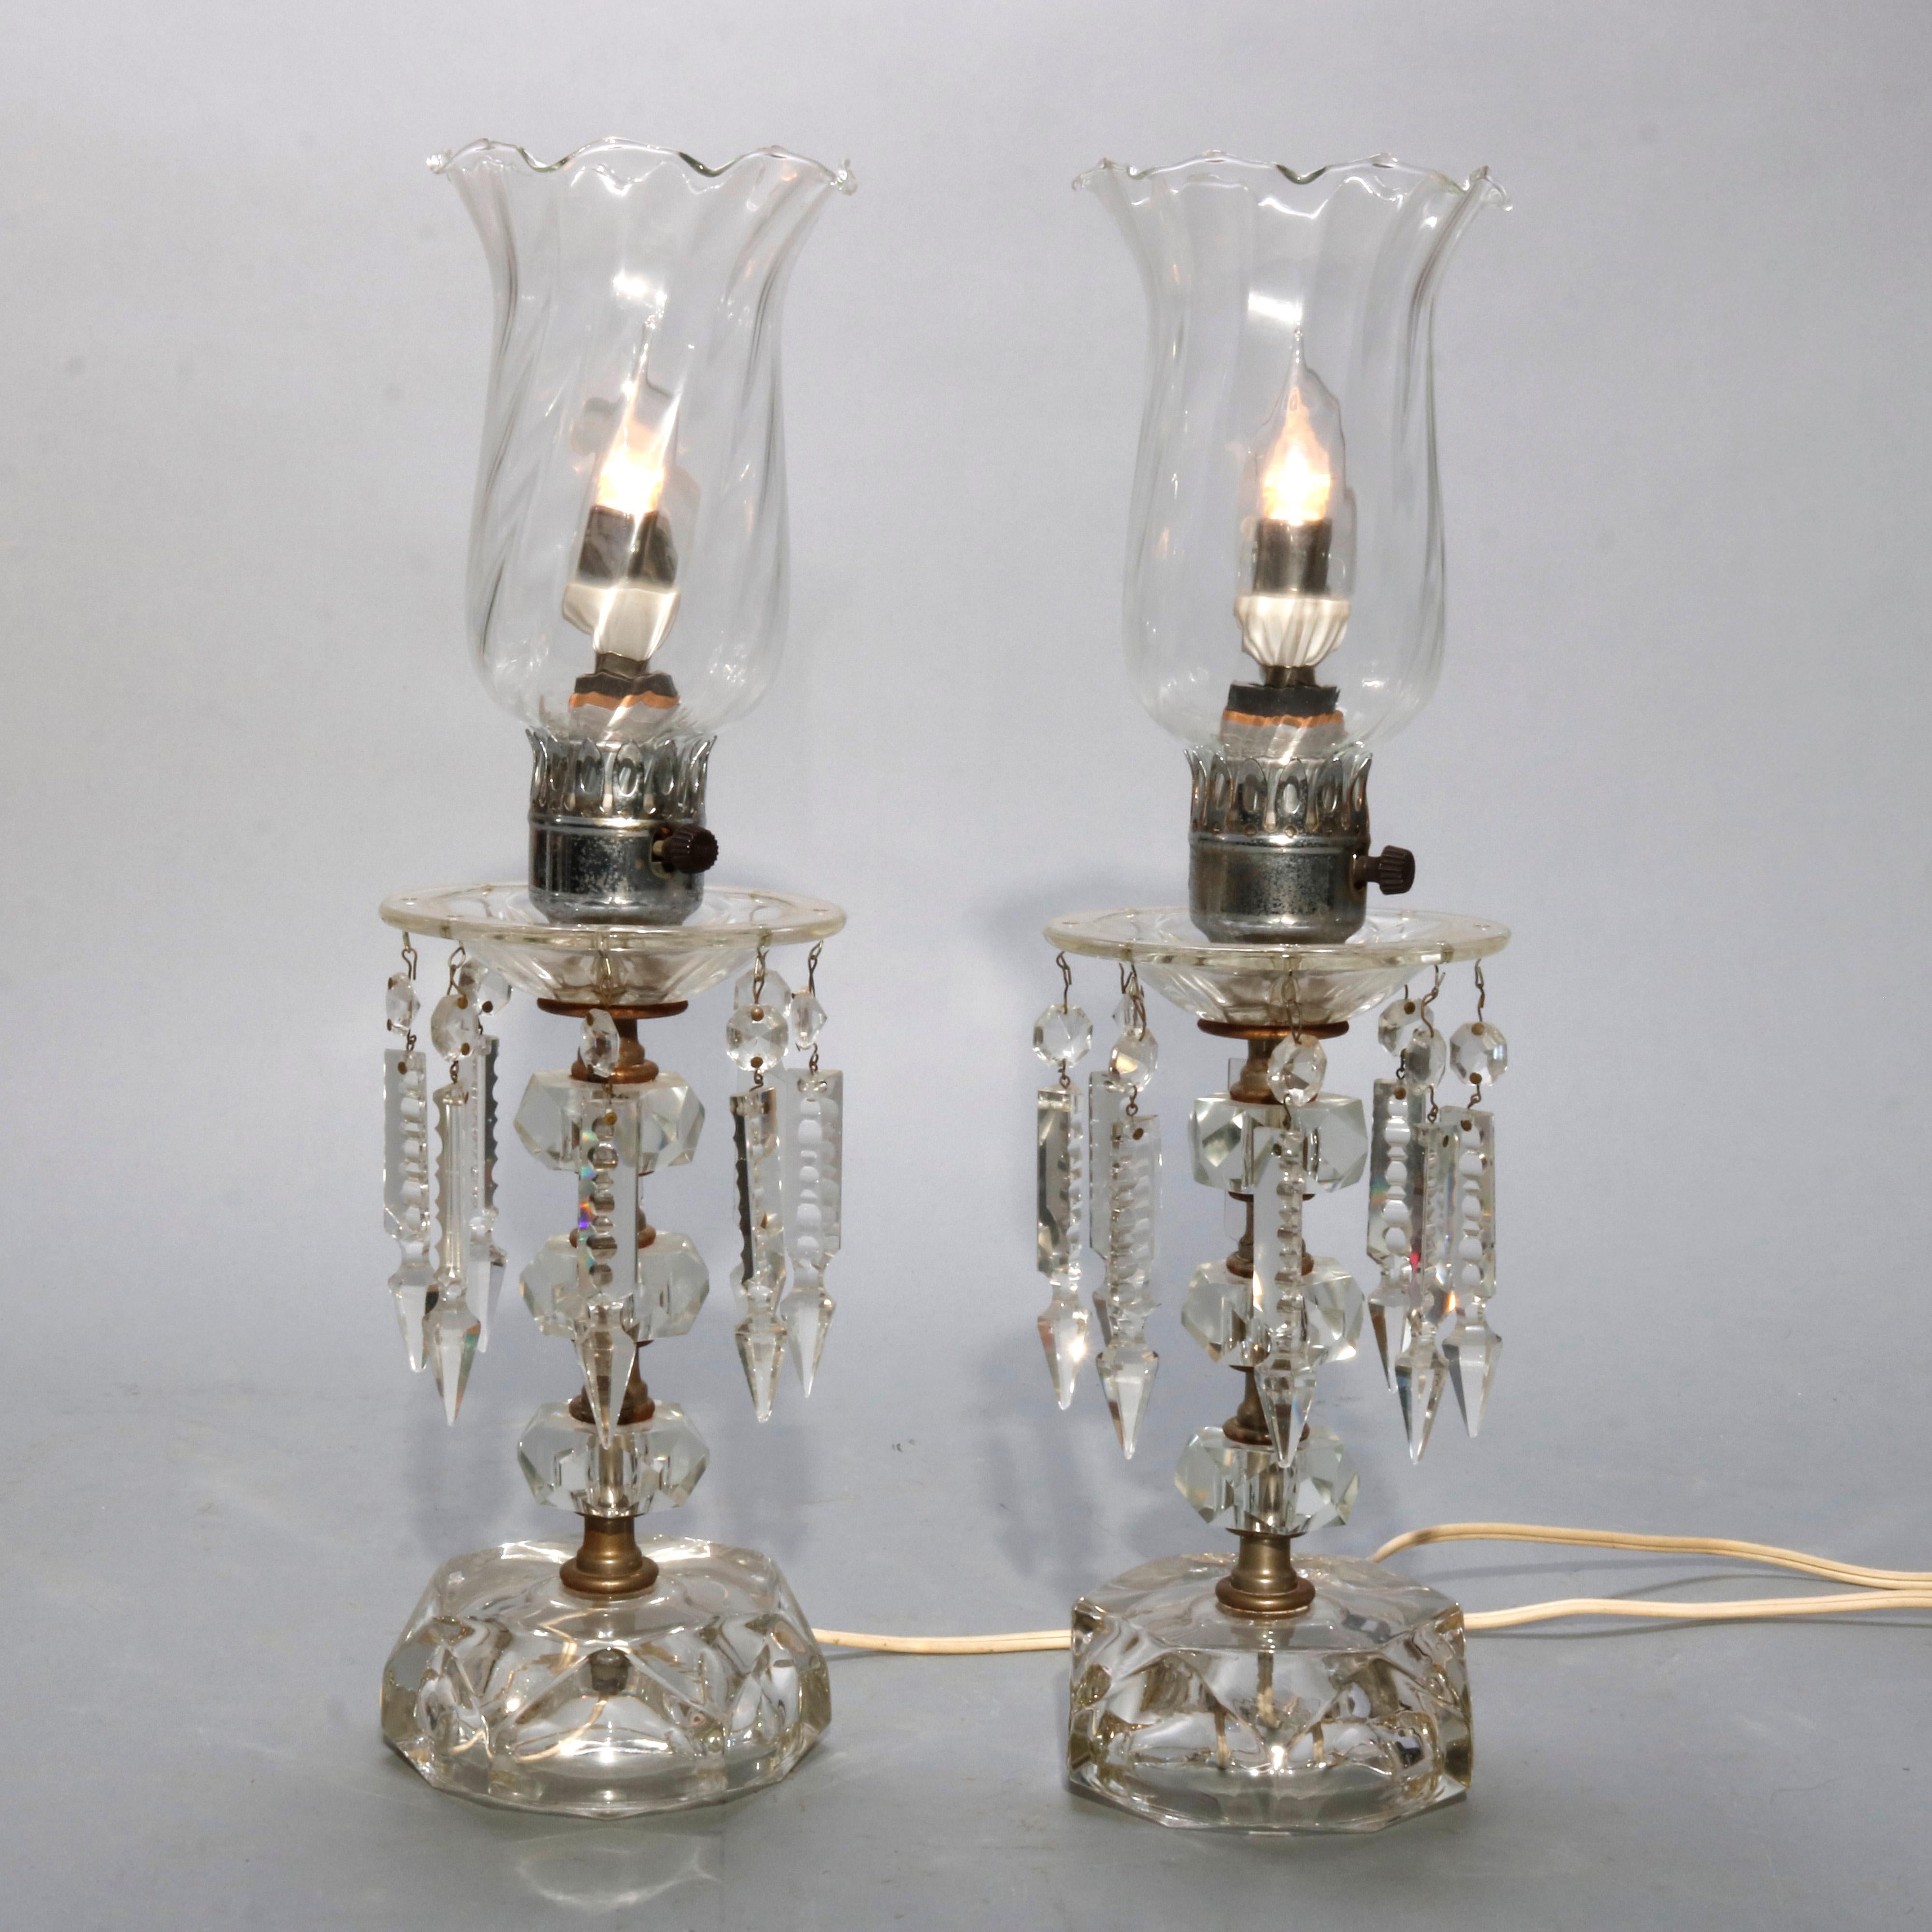 20th Century Antique Pair of Cut Crystal Candelabra Balustrade Table Lamps, circa 1930